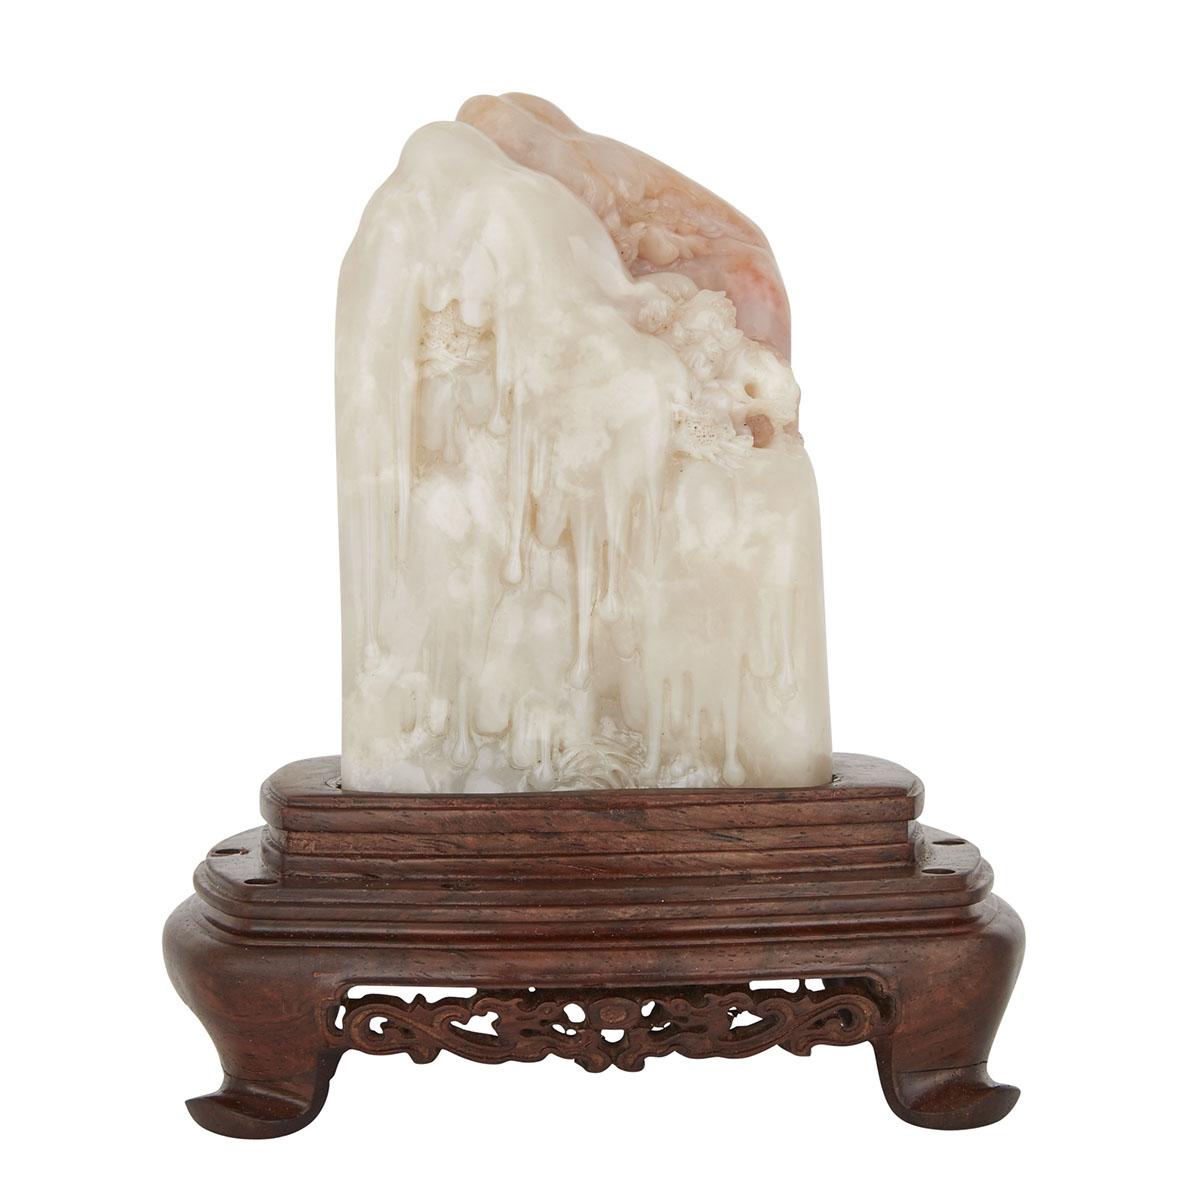 A LARGE AND RARE SHOUSHAN SHANBO STONE WITH A ROSEWOOD STAND 善伯洞石雕山水人物擺件 The creamy pink semi-